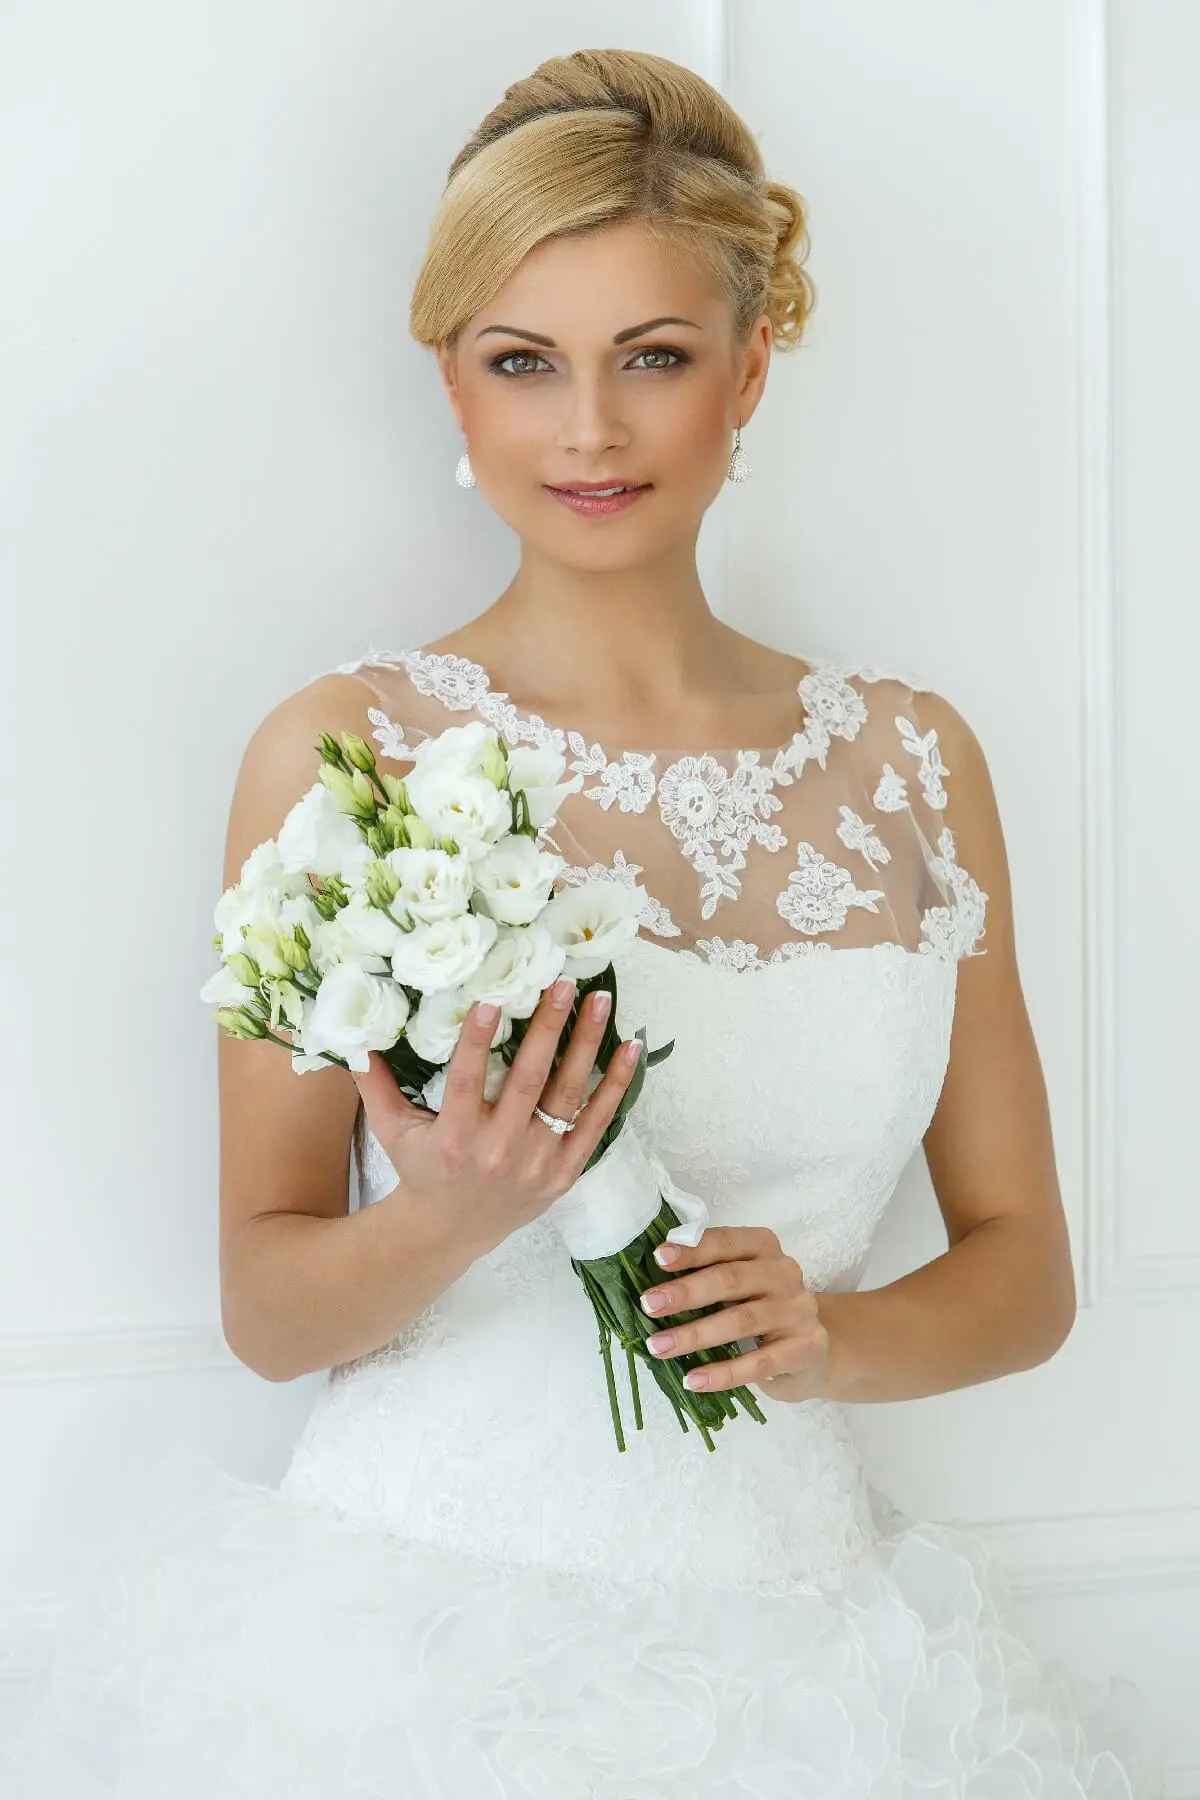 Beautiful Wedding Makeup Ideas With A Contoured Look with Blush